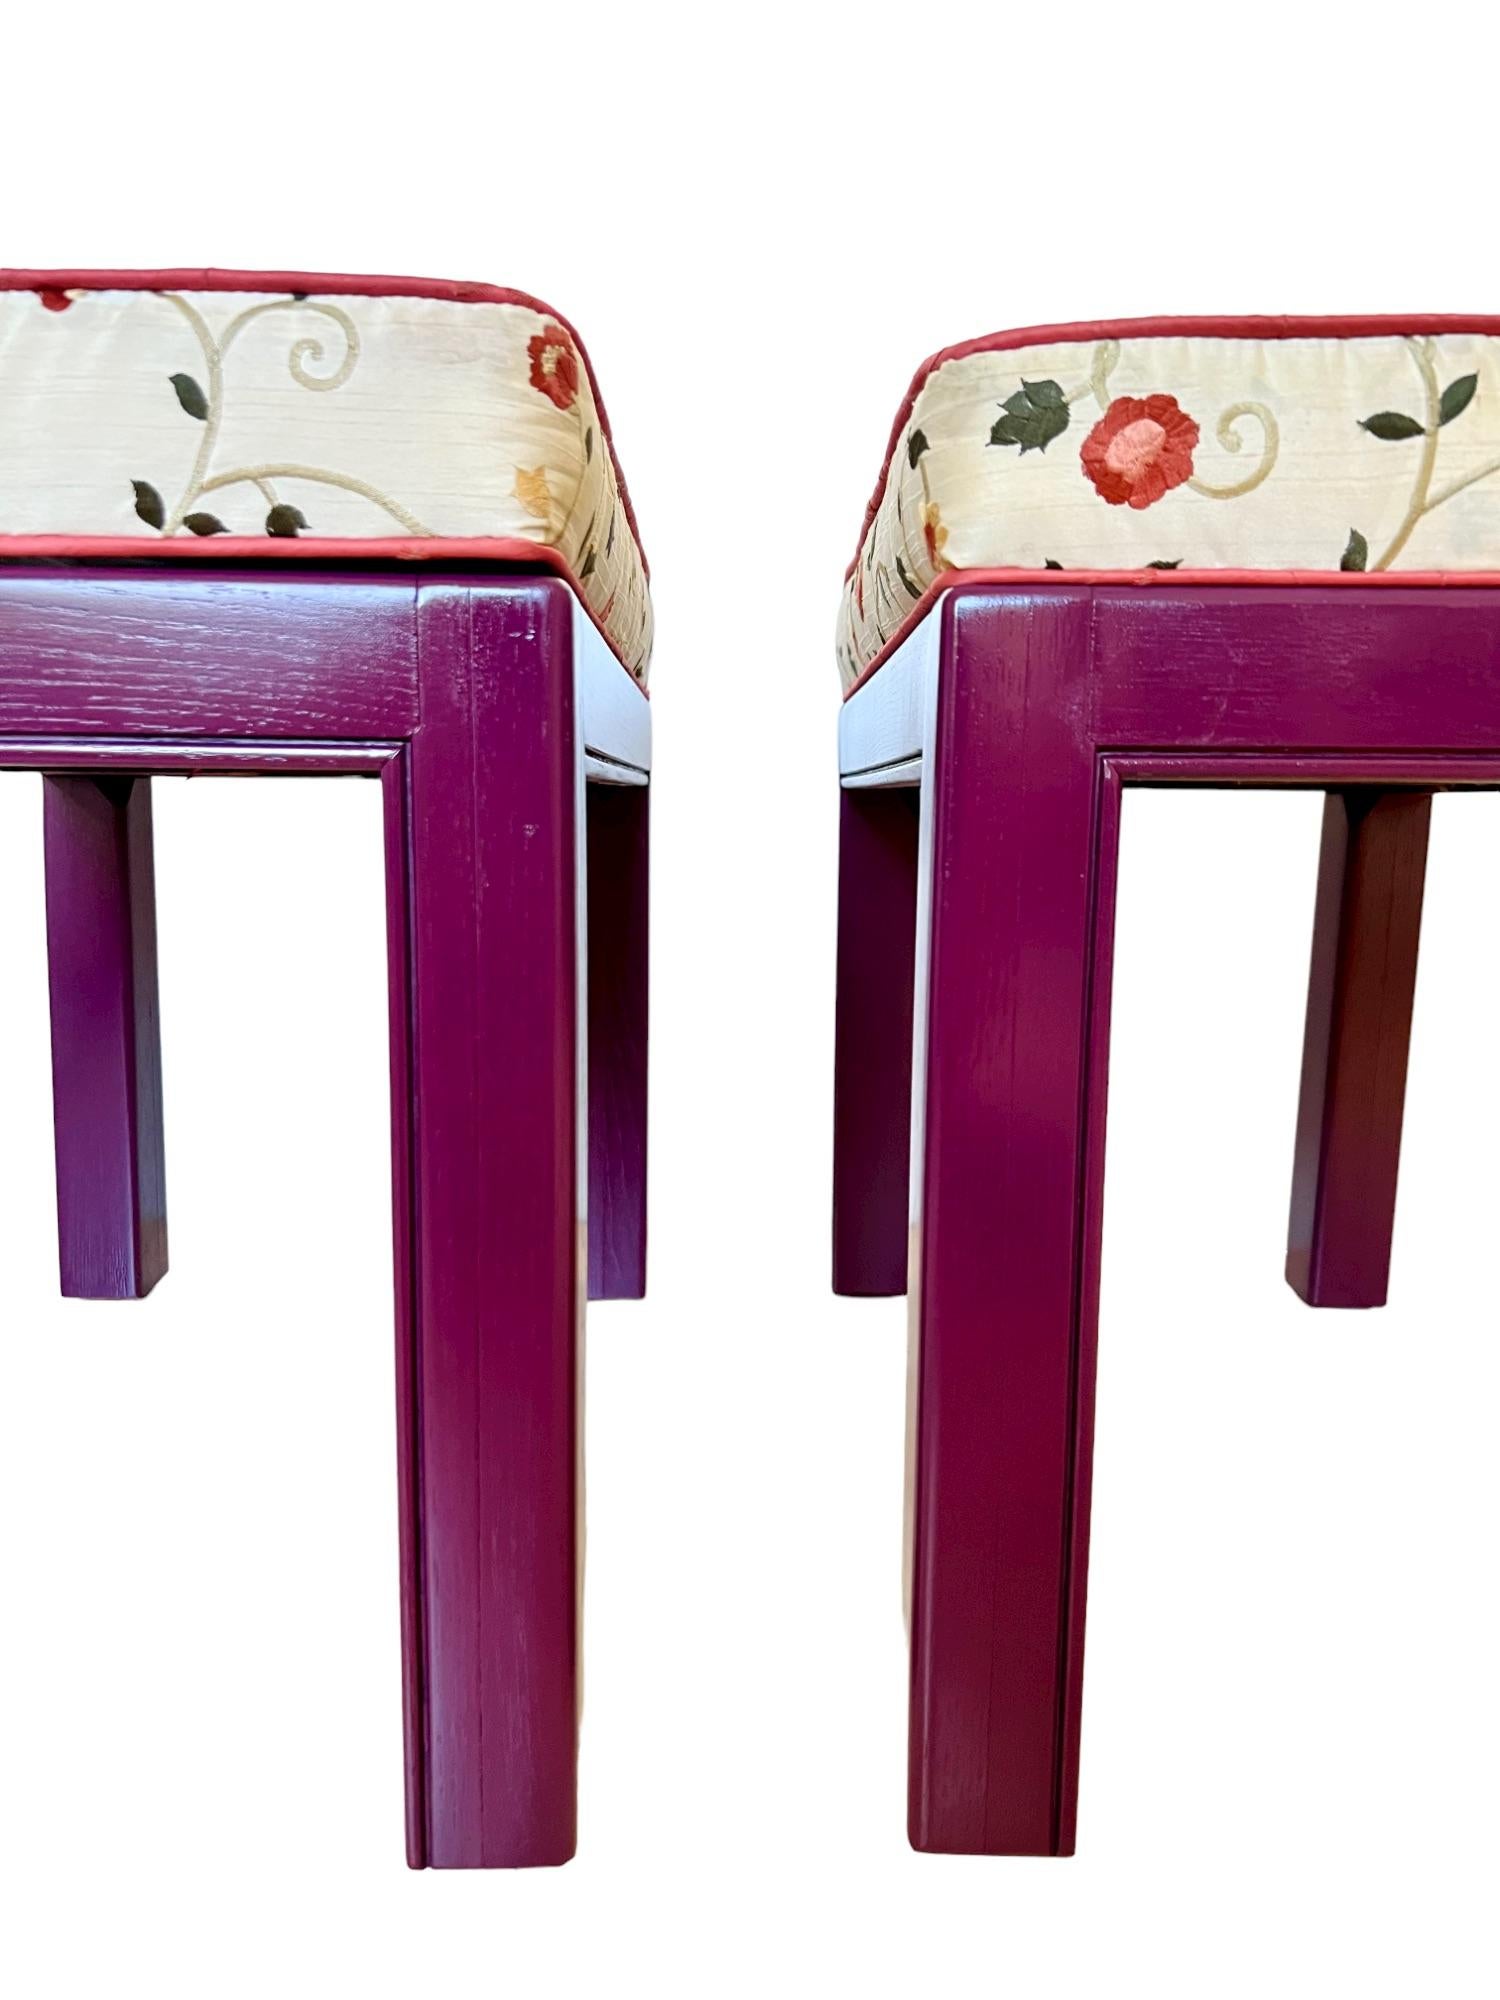 Drexel Chippendale Upholstered Aubergine Benches, a Pair 2